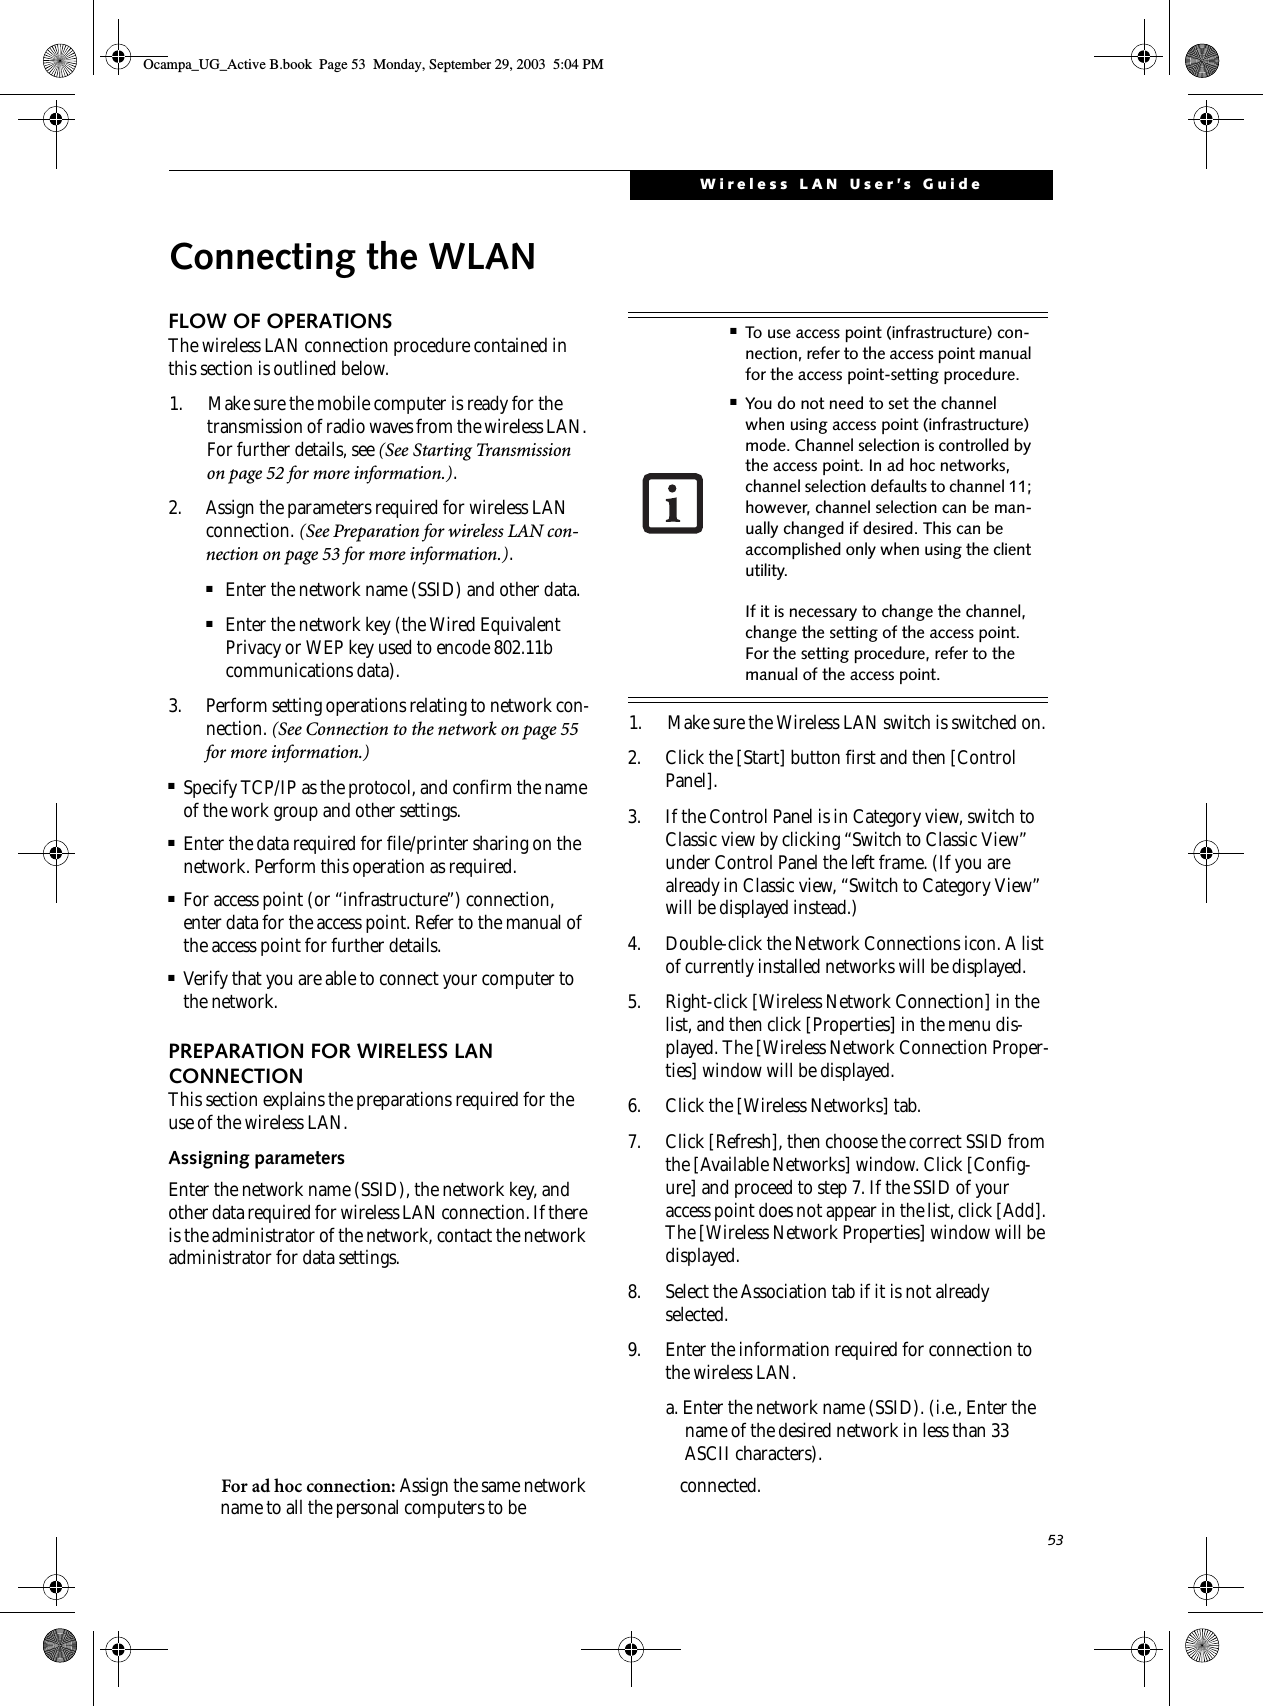 53Wireless LAN User’s GuideConnecting the WLANFLOW OF OPERATIONSThe wireless LAN connection procedure contained in this section is outlined below.1. Make sure the mobile computer is ready for the transmission of radio waves from the wireless LAN. For further details, see (See Starting Transmission on page 52 for more information.).2. Assign the parameters required for wireless LAN connection. (See Preparation for wireless LAN con-nection on page 53 for more information.).■Enter the network name (SSID) and other data.■Enter the network key (the Wired Equivalent Privacy or WEP key used to encode 802.11b communications data).3. Perform setting operations relating to network con-nection. (See Connection to the network on page 55 for more information.)■Specify TCP/IP as the protocol, and confirm the name of the work group and other settings.■Enter the data required for file/printer sharing on the network. Perform this operation as required.■For access point (or “infrastructure”) connection, enter data for the access point. Refer to the manual of the access point for further details.■Verify that you are able to connect your computer to the network.PREPARATION FOR WIRELESS LAN CONNECTIONThis section explains the preparations required for the use of the wireless LAN.Assigning parametersEnter the network name (SSID), the network key, and other data required for wireless LAN connection. If there is the administrator of the network, contact the network administrator for data settings.1. Make sure the Wireless LAN switch is switched on.2. Click the [Start] button first and then [Control Panel].3. If the Control Panel is in Category view, switch to Classic view by clicking “Switch to Classic View” under Control Panel the left frame. (If you are already in Classic view, “Switch to Category View” will be displayed instead.) 4. Double-click the Network Connections icon. A list of currently installed networks will be displayed.5. Right-click [Wireless Network Connection] in the list, and then click [Properties] in the menu dis-played. The [Wireless Network Connection Proper-ties] window will be displayed.6. Click the [Wireless Networks] tab.7. Click [Refresh], then choose the correct SSID from the [Available Networks] window. Click [Config-ure] and proceed to step 7. If the SSID of your access point does not appear in the list, click [Add]. The [Wireless Network Properties] window will be displayed.8. Select the Association tab if it is not already selected.9. Enter the information required for connection to the wireless LAN.a. Enter the network name (SSID). (i.e., Enter the name of the desired network in less than 33 ASCII characters).For ad hoc connection: Assign the same network name to all the personal computers to be  connected.■To use access point (infrastructure) con-nection, refer to the access point manual for the access point-setting procedure.■You do not need to set the channel when using access point (infrastructure) mode. Channel selection is controlled by the access point. In ad hoc networks, channel selection defaults to channel 11; however, channel selection can be man-ually changed if desired. This can be accomplished only when using the client utility.If it is necessary to change the channel, change the setting of the access point. For the setting procedure, refer to the manual of the access point.Ocampa_UG_Active B.book  Page 53  Monday, September 29, 2003  5:04 PM